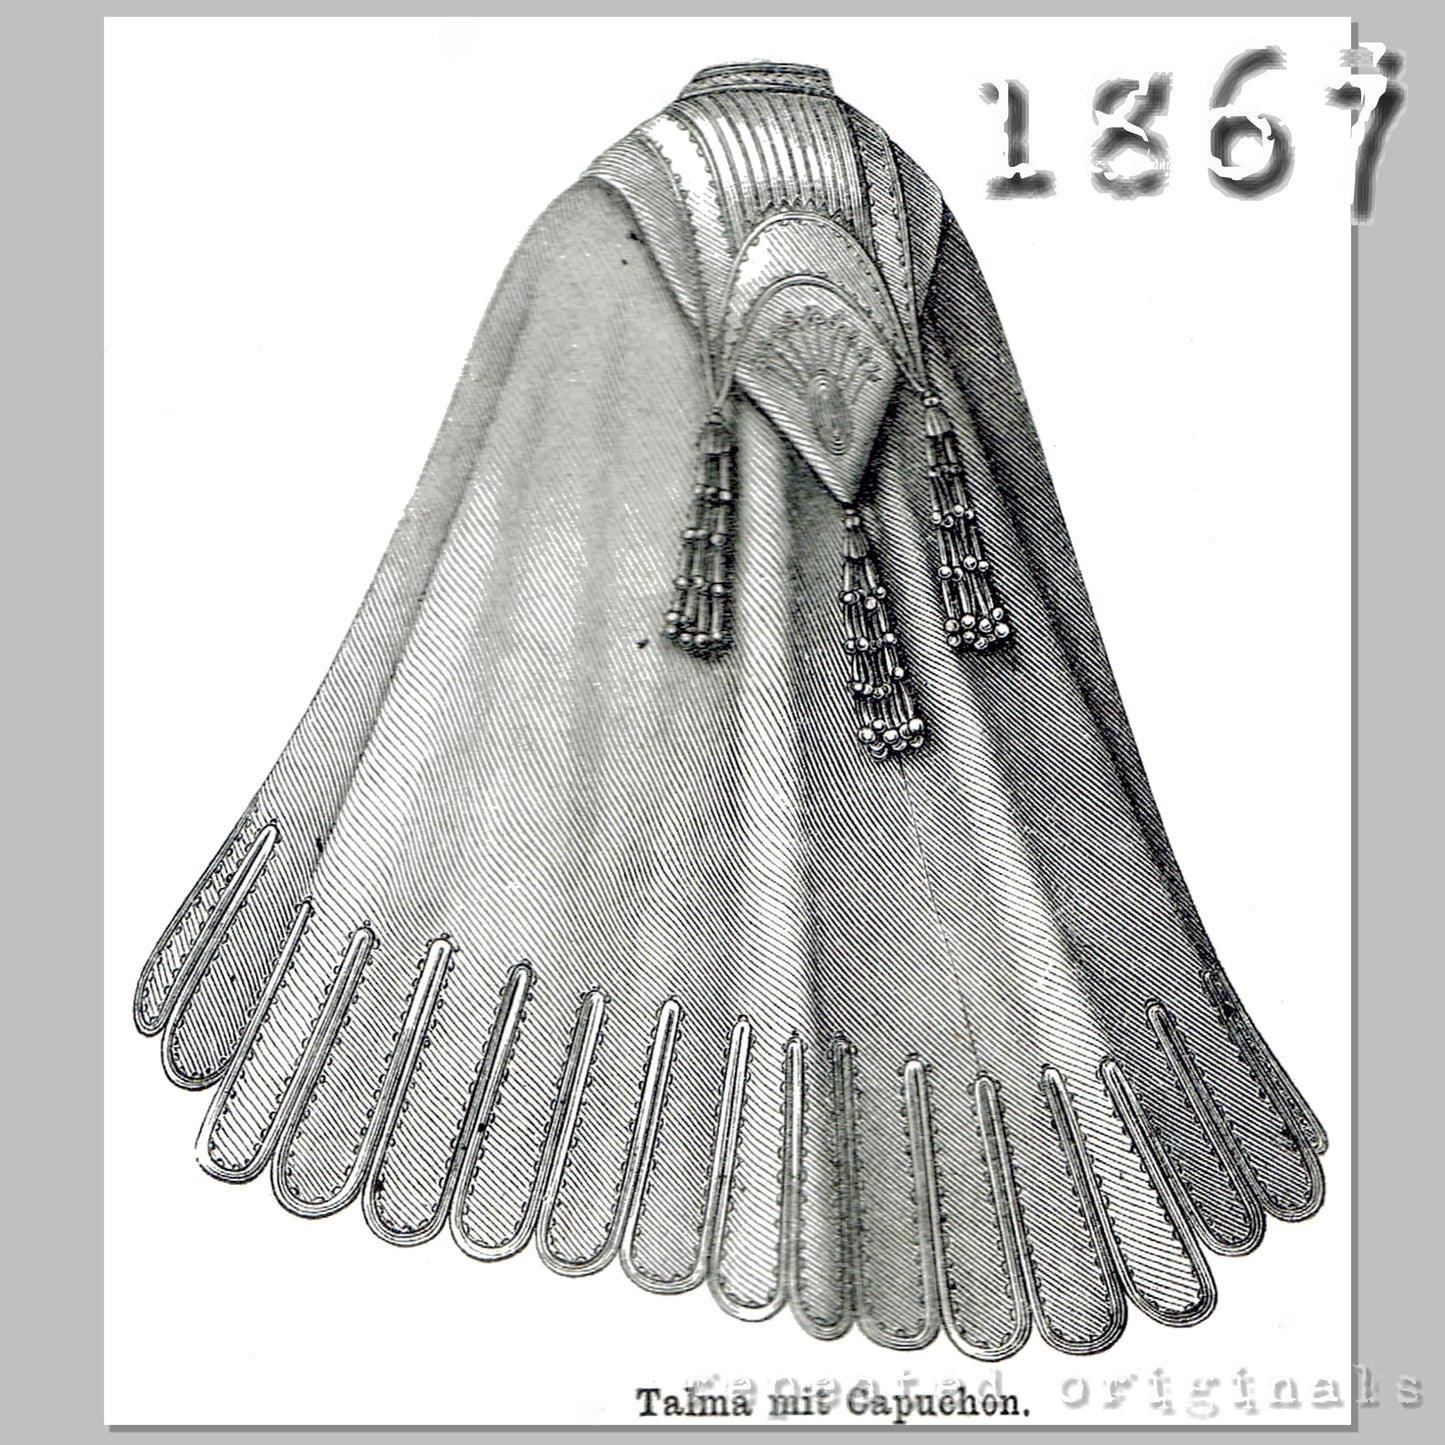 1867 Talma with Capuchon Sewing Pattern - INSTANT DOWNLOAD PDF